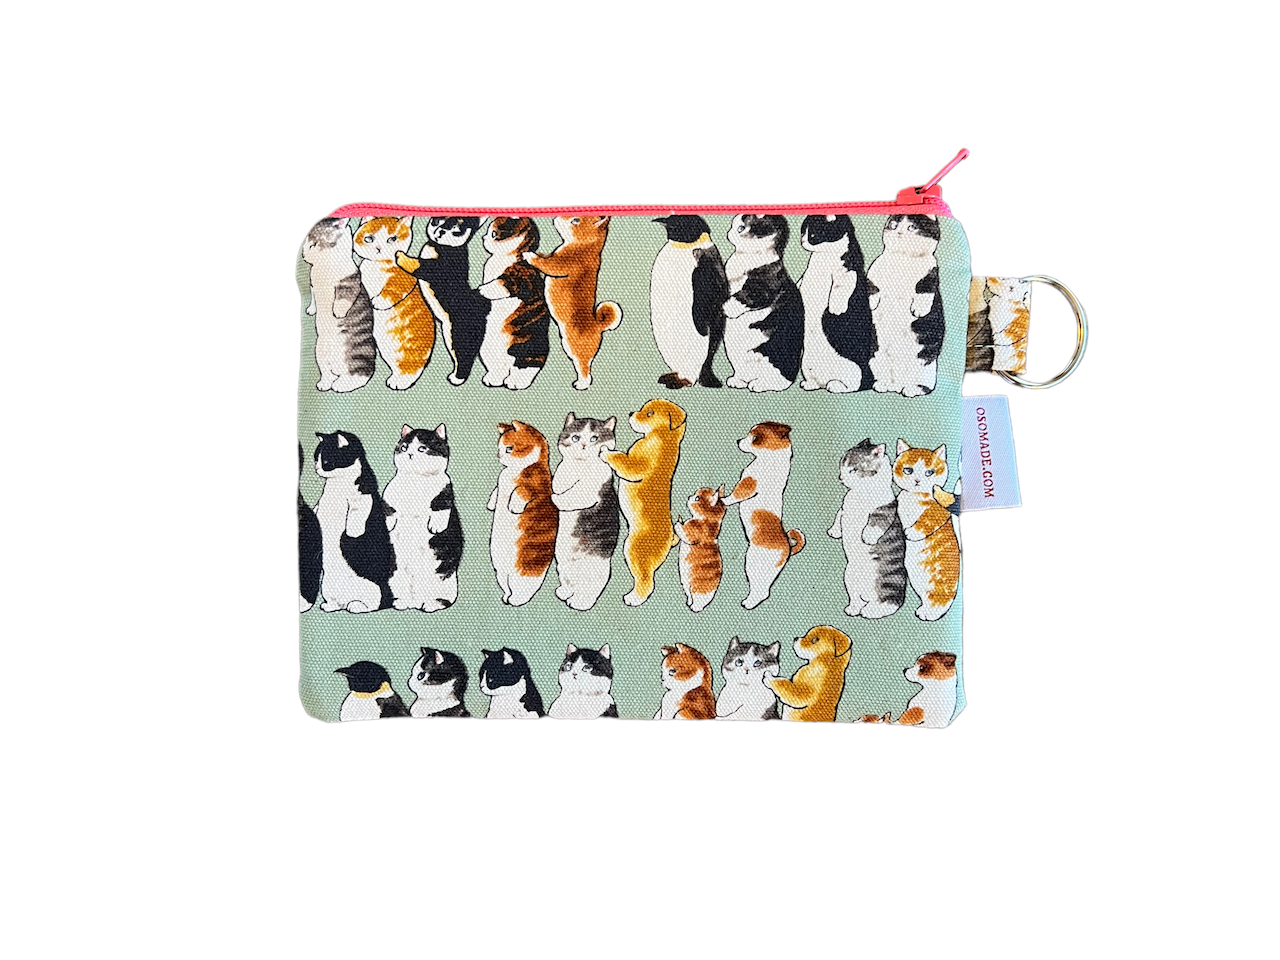 Cat print coin purse, cat print pouch, cats and dogs money purse, kawaii canvas zipper bag, 6" x 4.5", gift for cat lover.